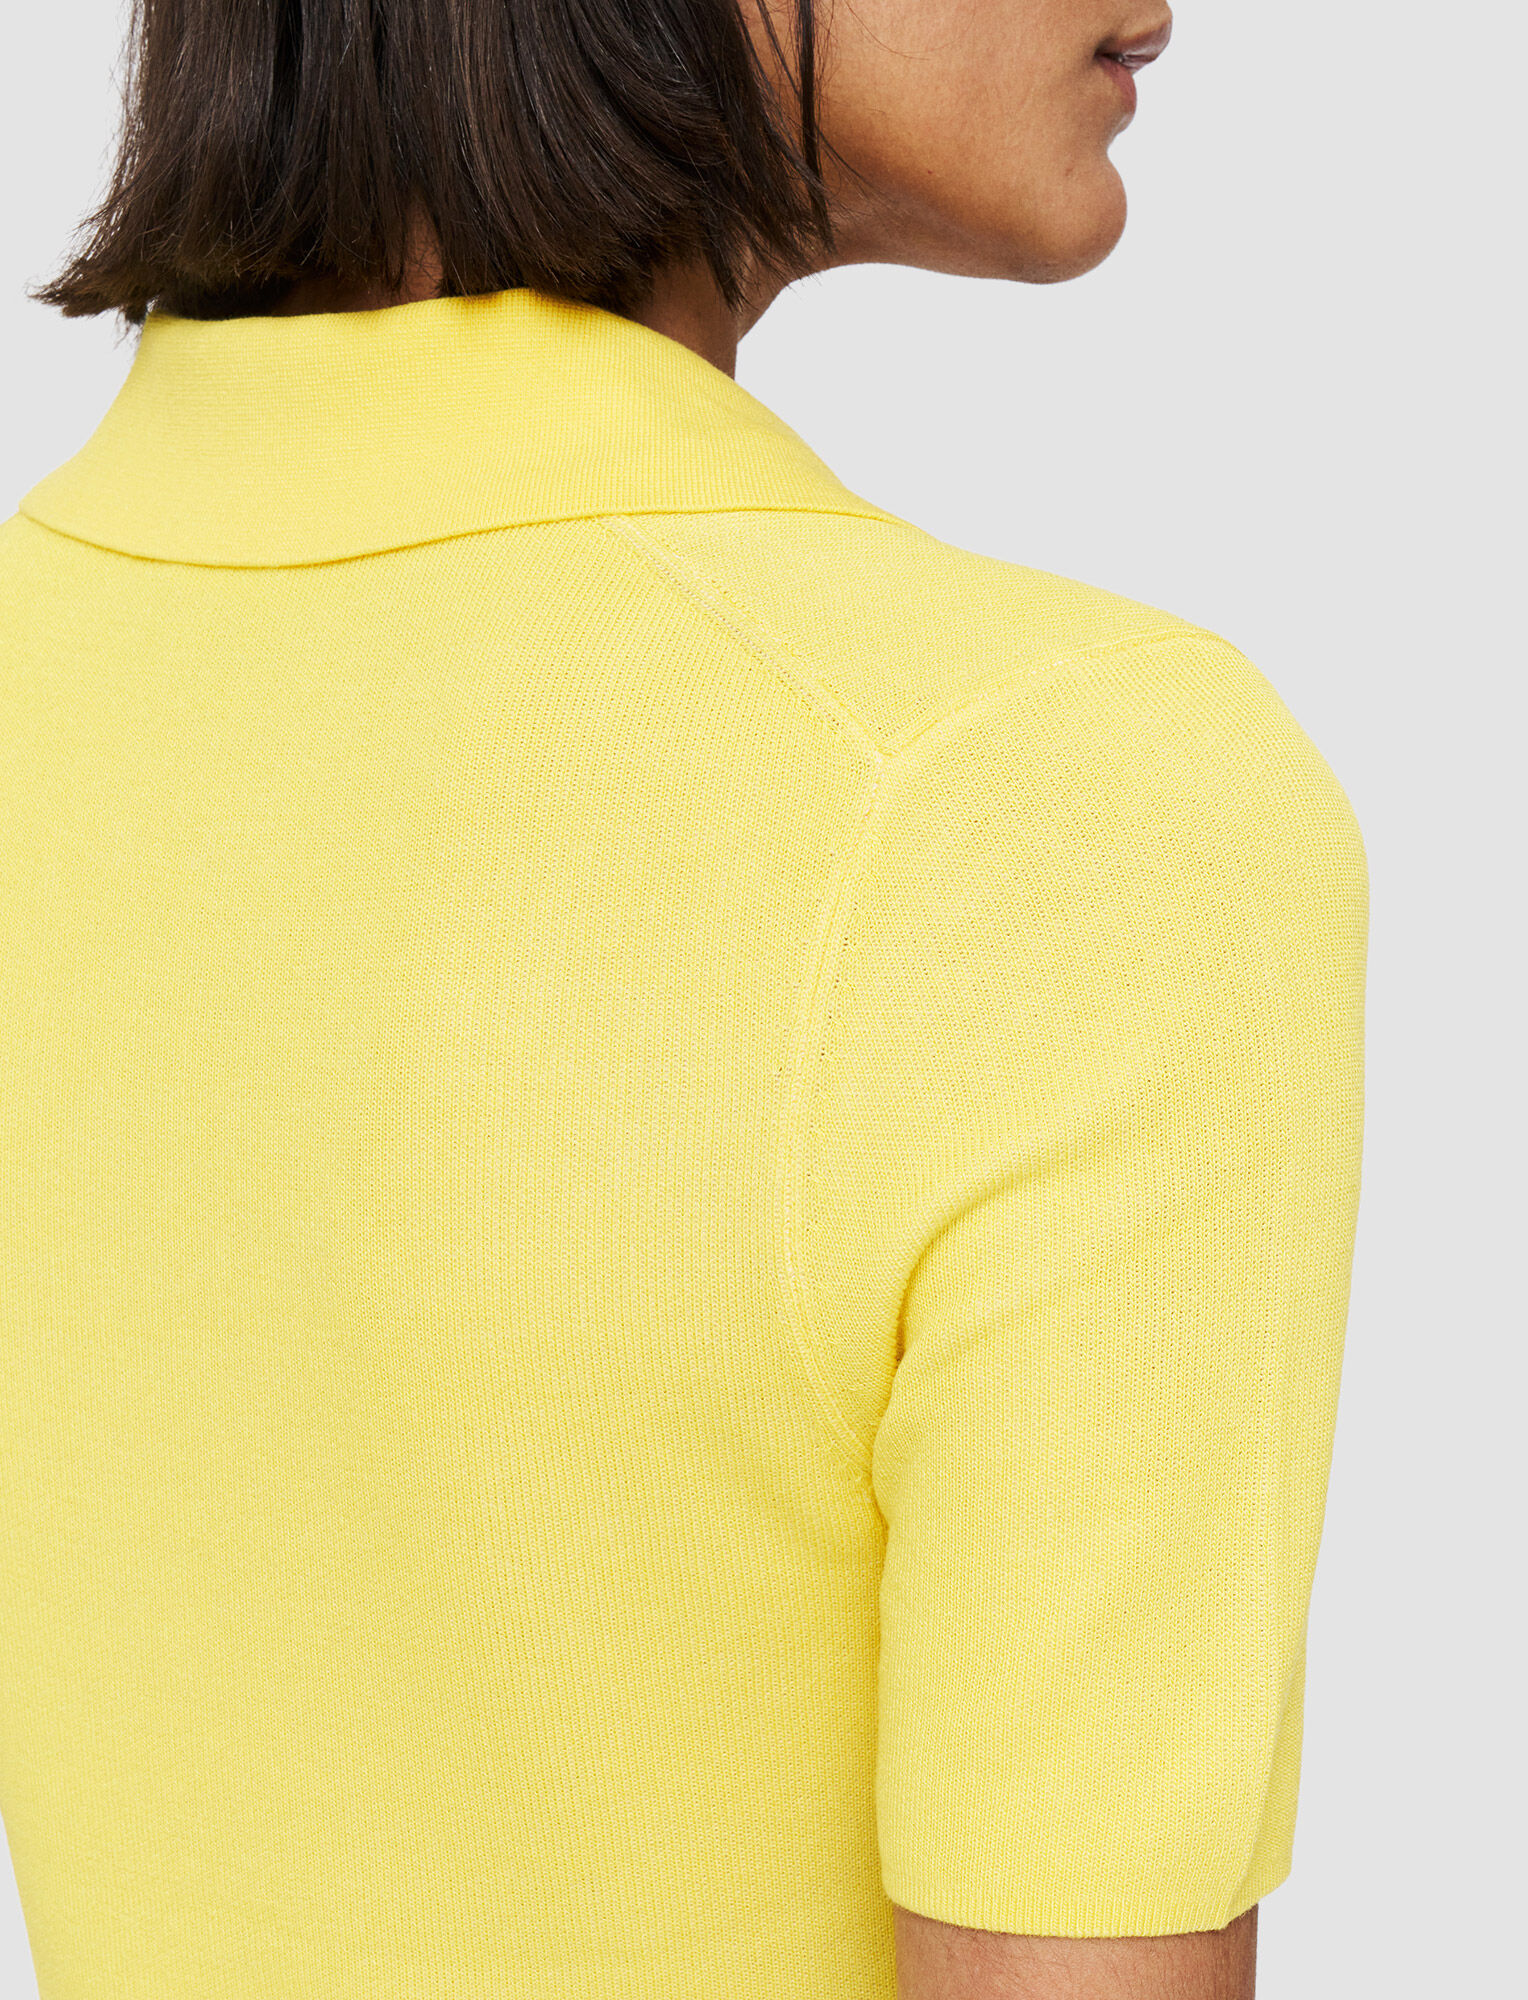 Joseph, Plated Knit Polo Top, in Sunshine Combo